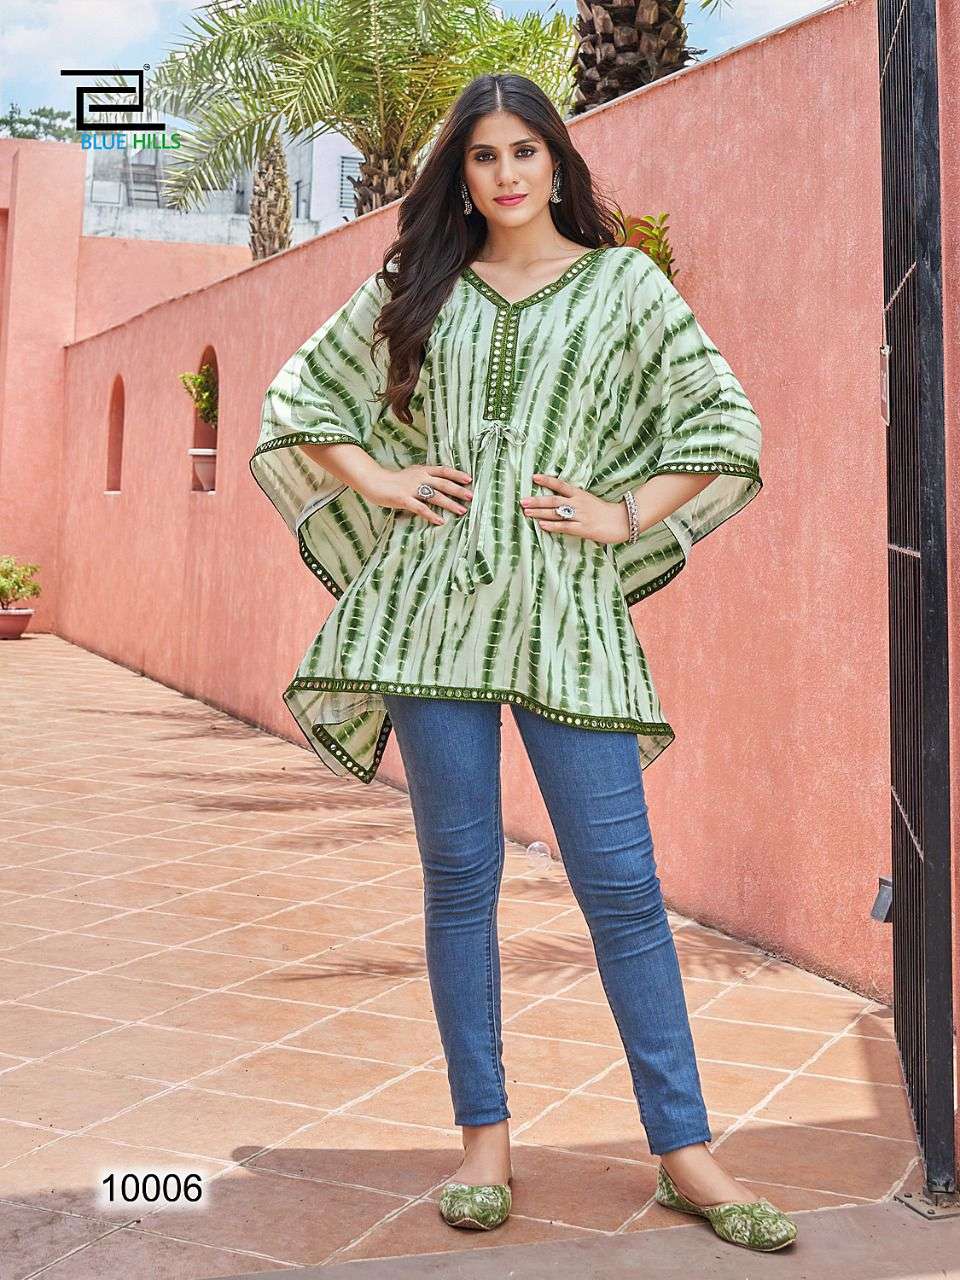 STARE VOL-10 BY BLUE HILLS 10001 TO 10008 SERIES BEAUTIFUL STYLISH FANCY COLORFUL CASUAL WEAR & ETHNIC WEAR HEAVY RAYON PRINT TOPS AT WHOLESALE PRICE